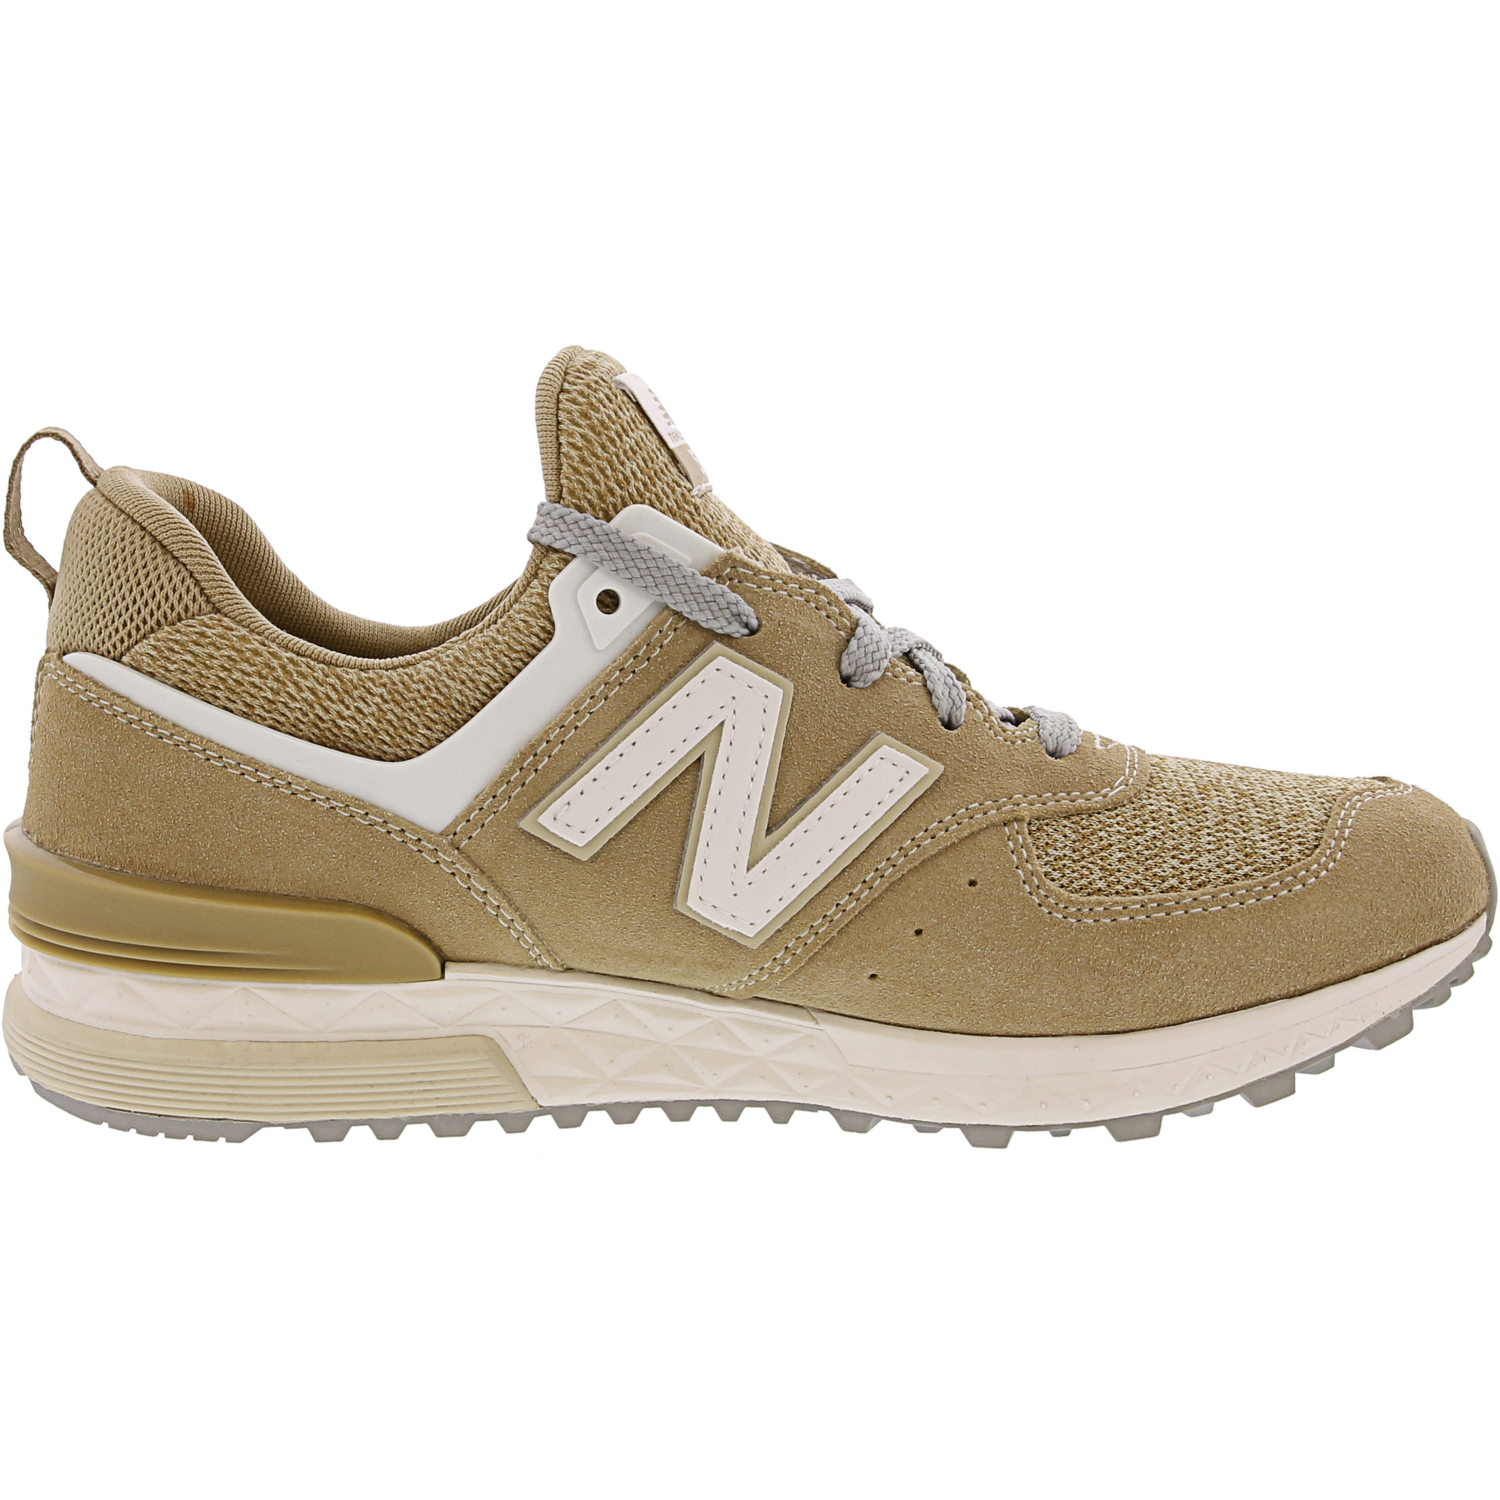 New Balance Men's Ms574 Ankle-High Suede Sneaker | eBay